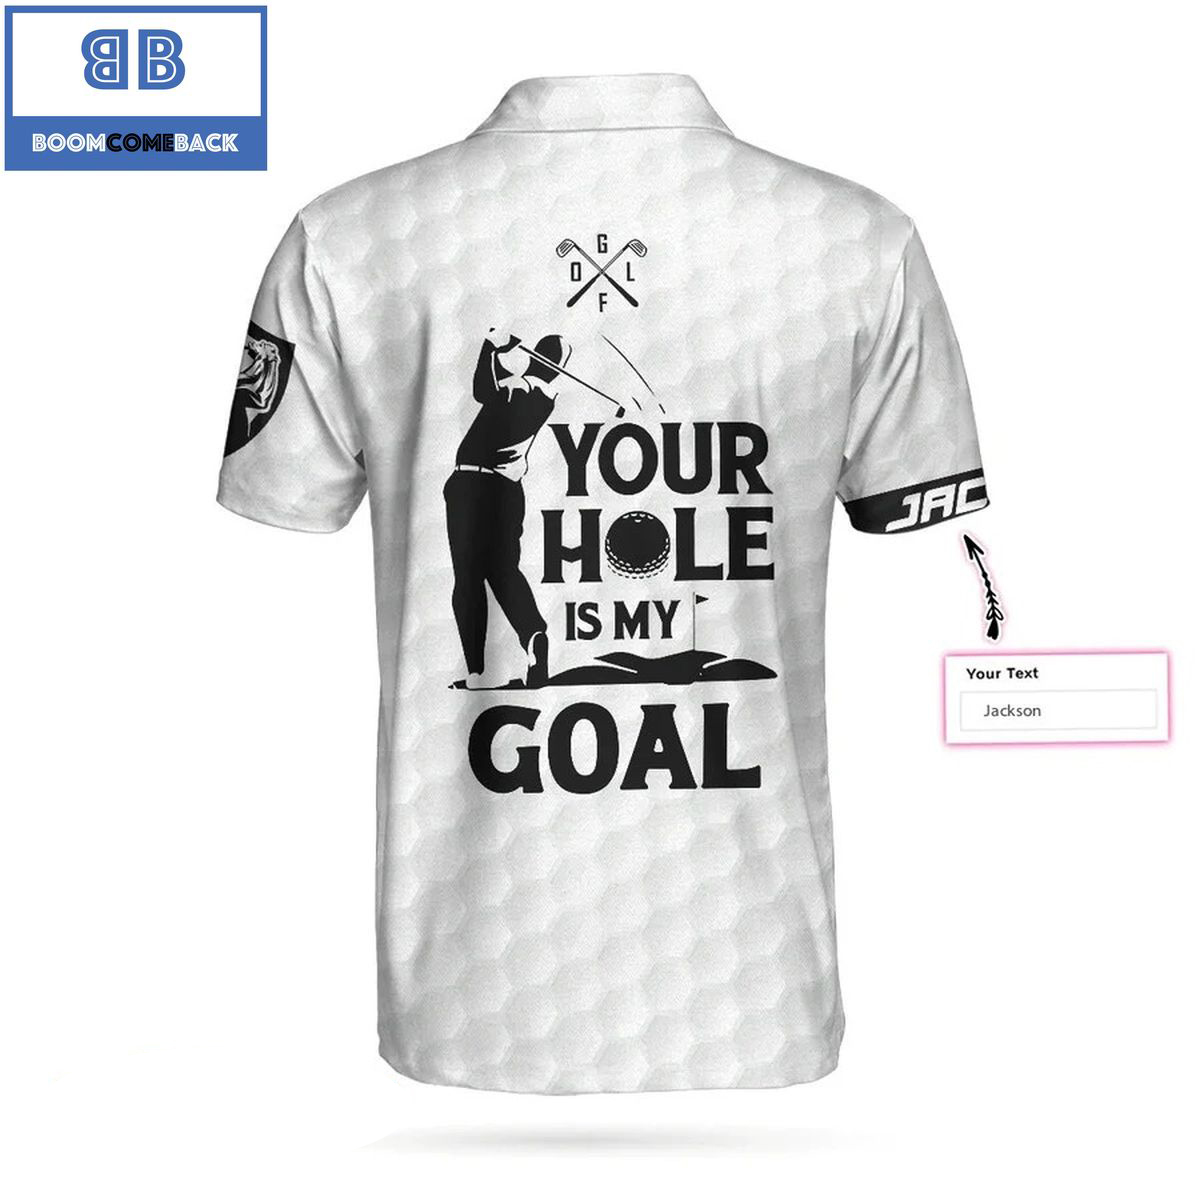 Personalized2BYour2BHole2BIs2BMy2BGoal2BWhite2BAmerican2BFlag2BAthletic2BCollared2BMens2BPolo2BShirt2B2